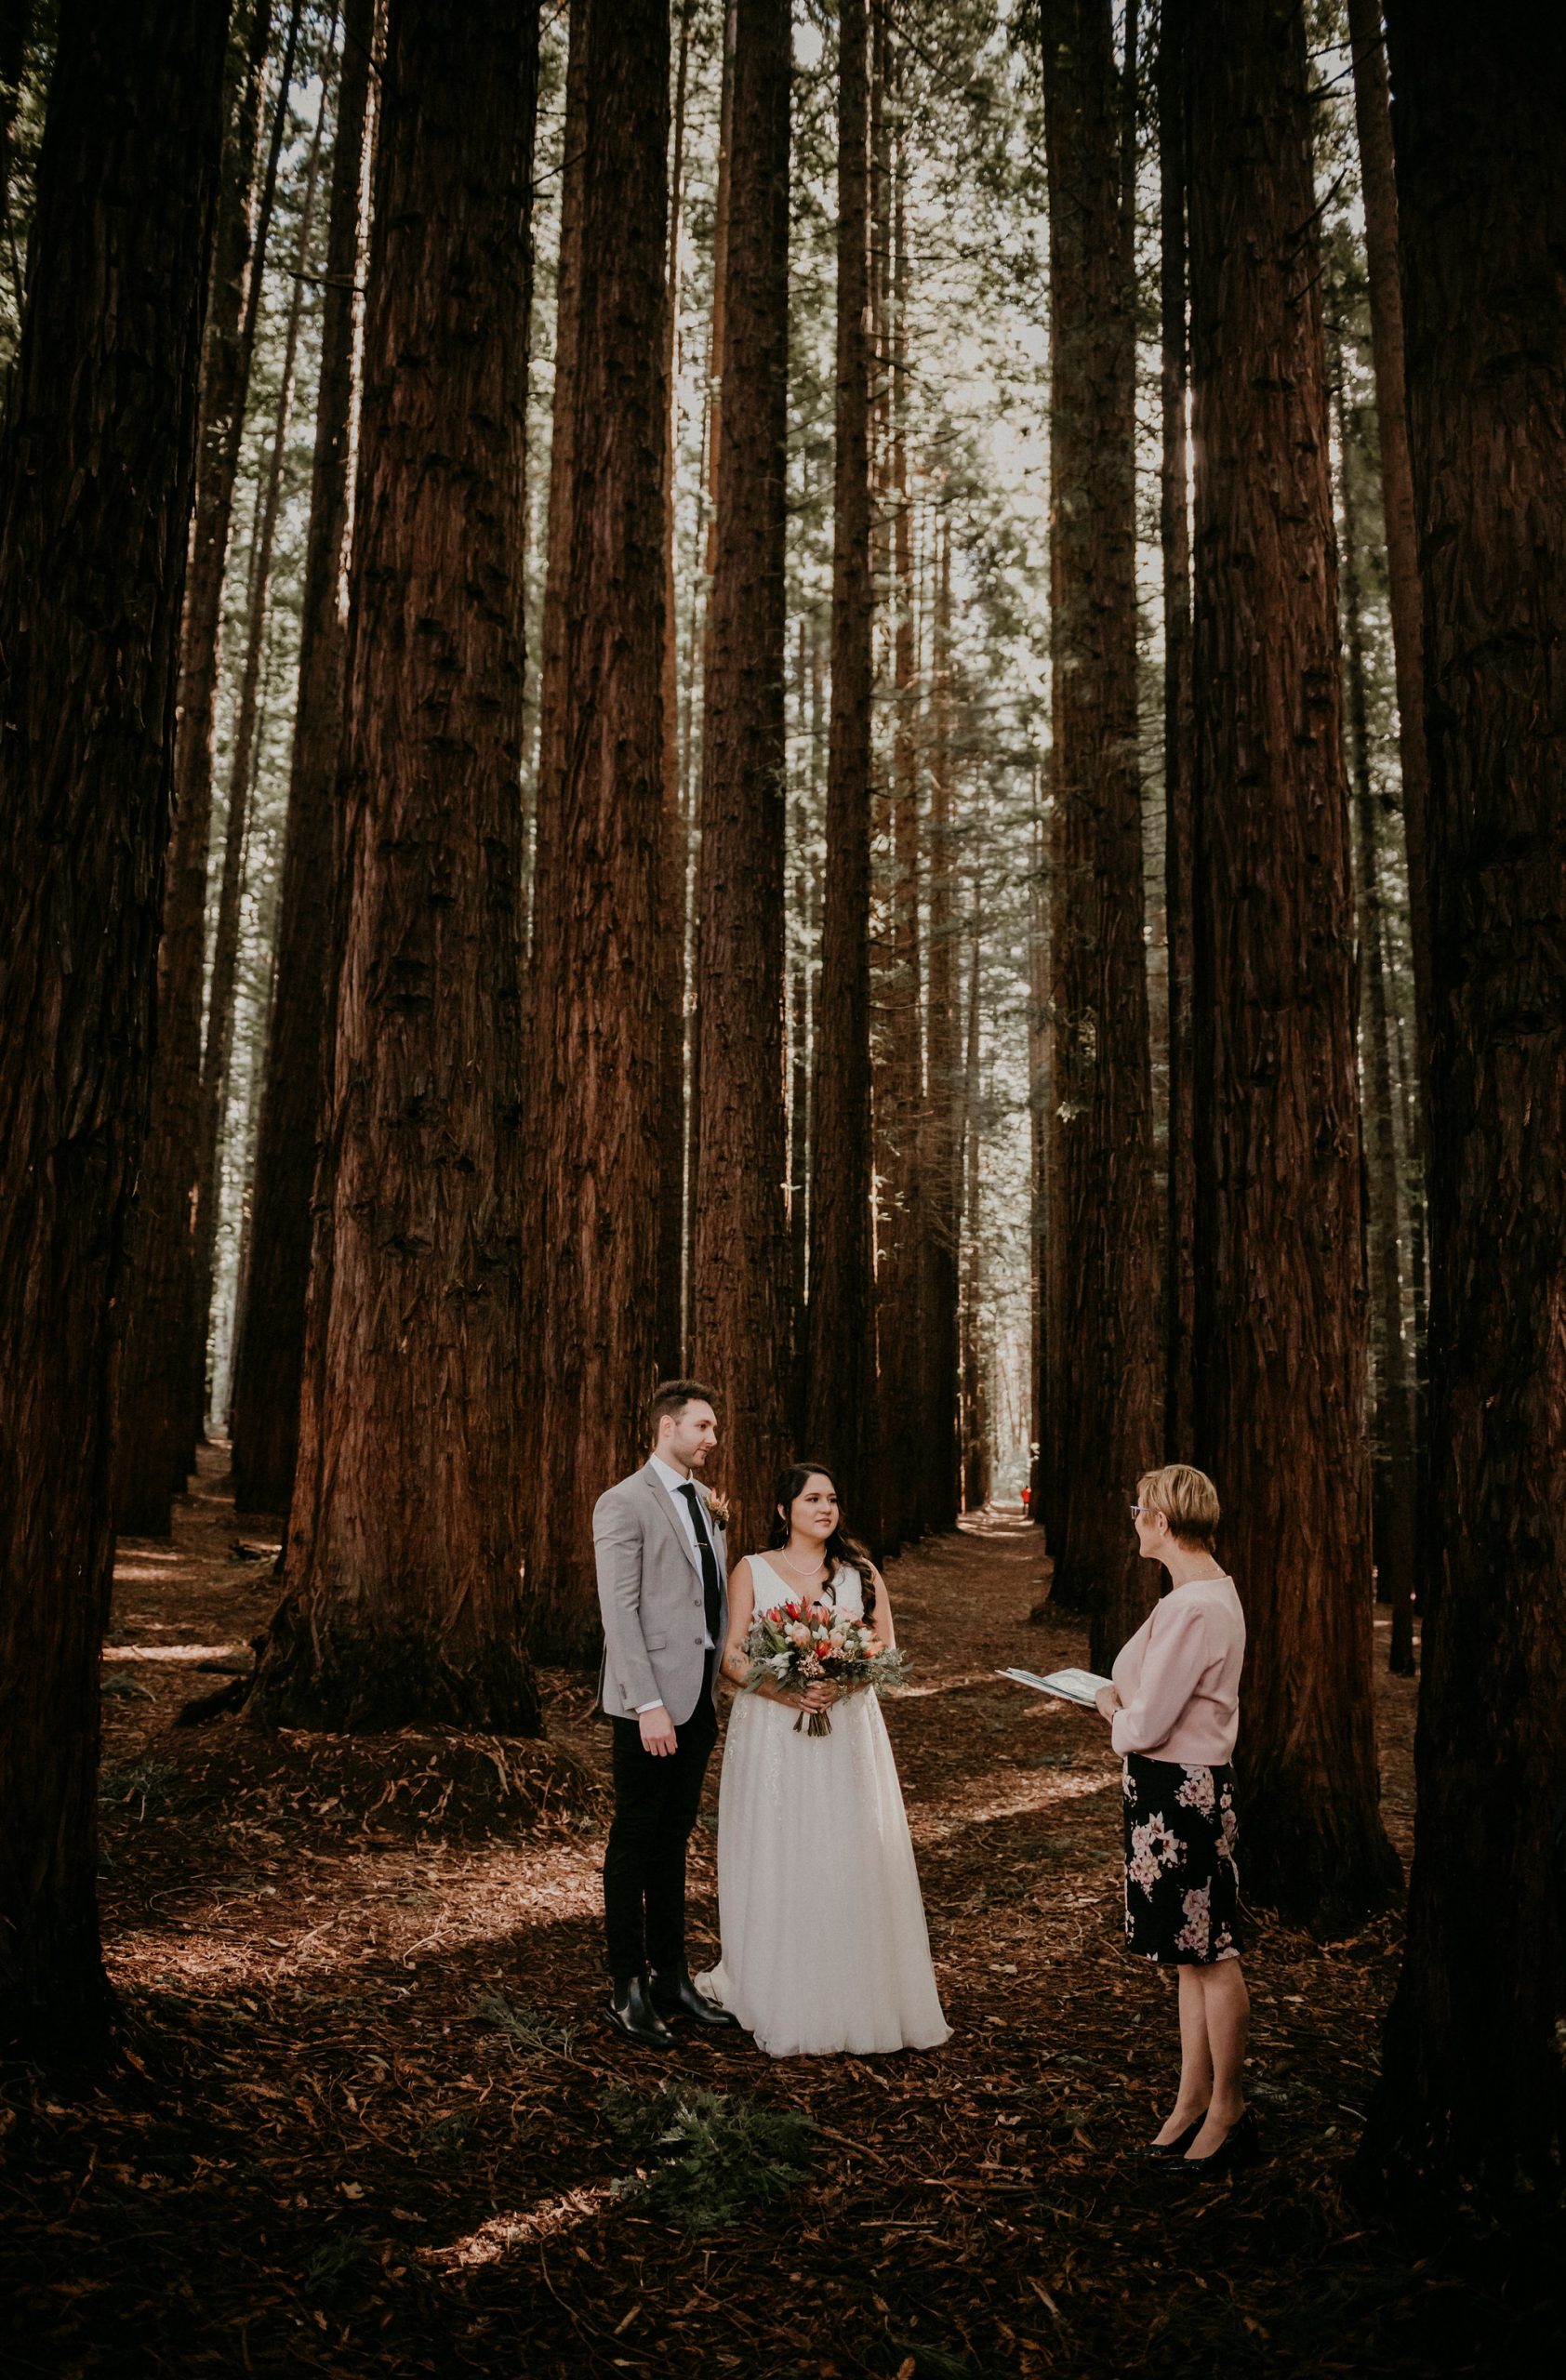 Lets-Elope-Melbourne-Celebrant-Photographer-Elopement-Package-Victoria-Sarah-Matler-Photography-Videography-Video-Warburton-Redwood-Forest-weddings-intimate-7